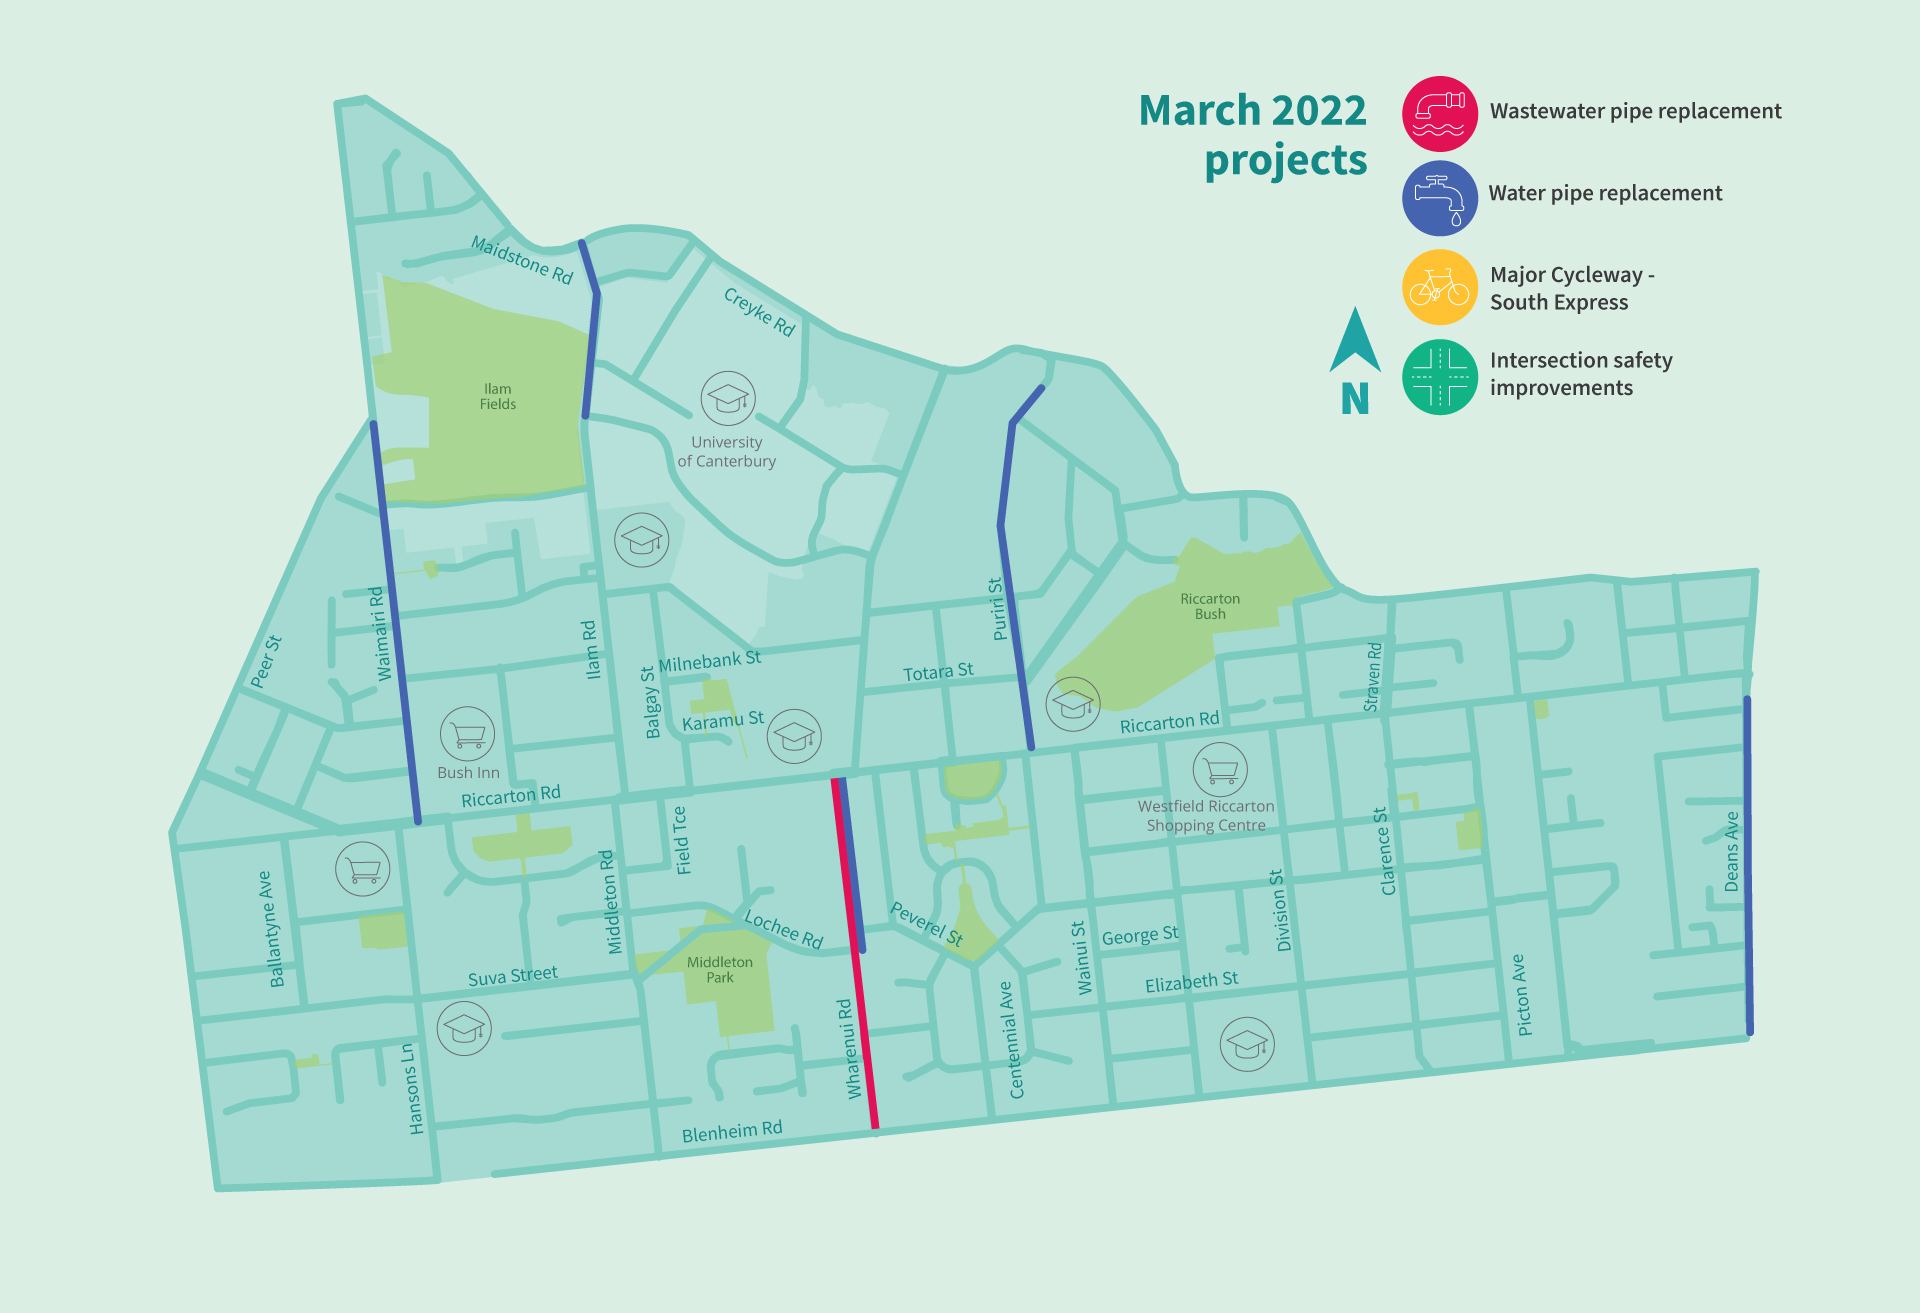 'Riccarton Road works map March 2022